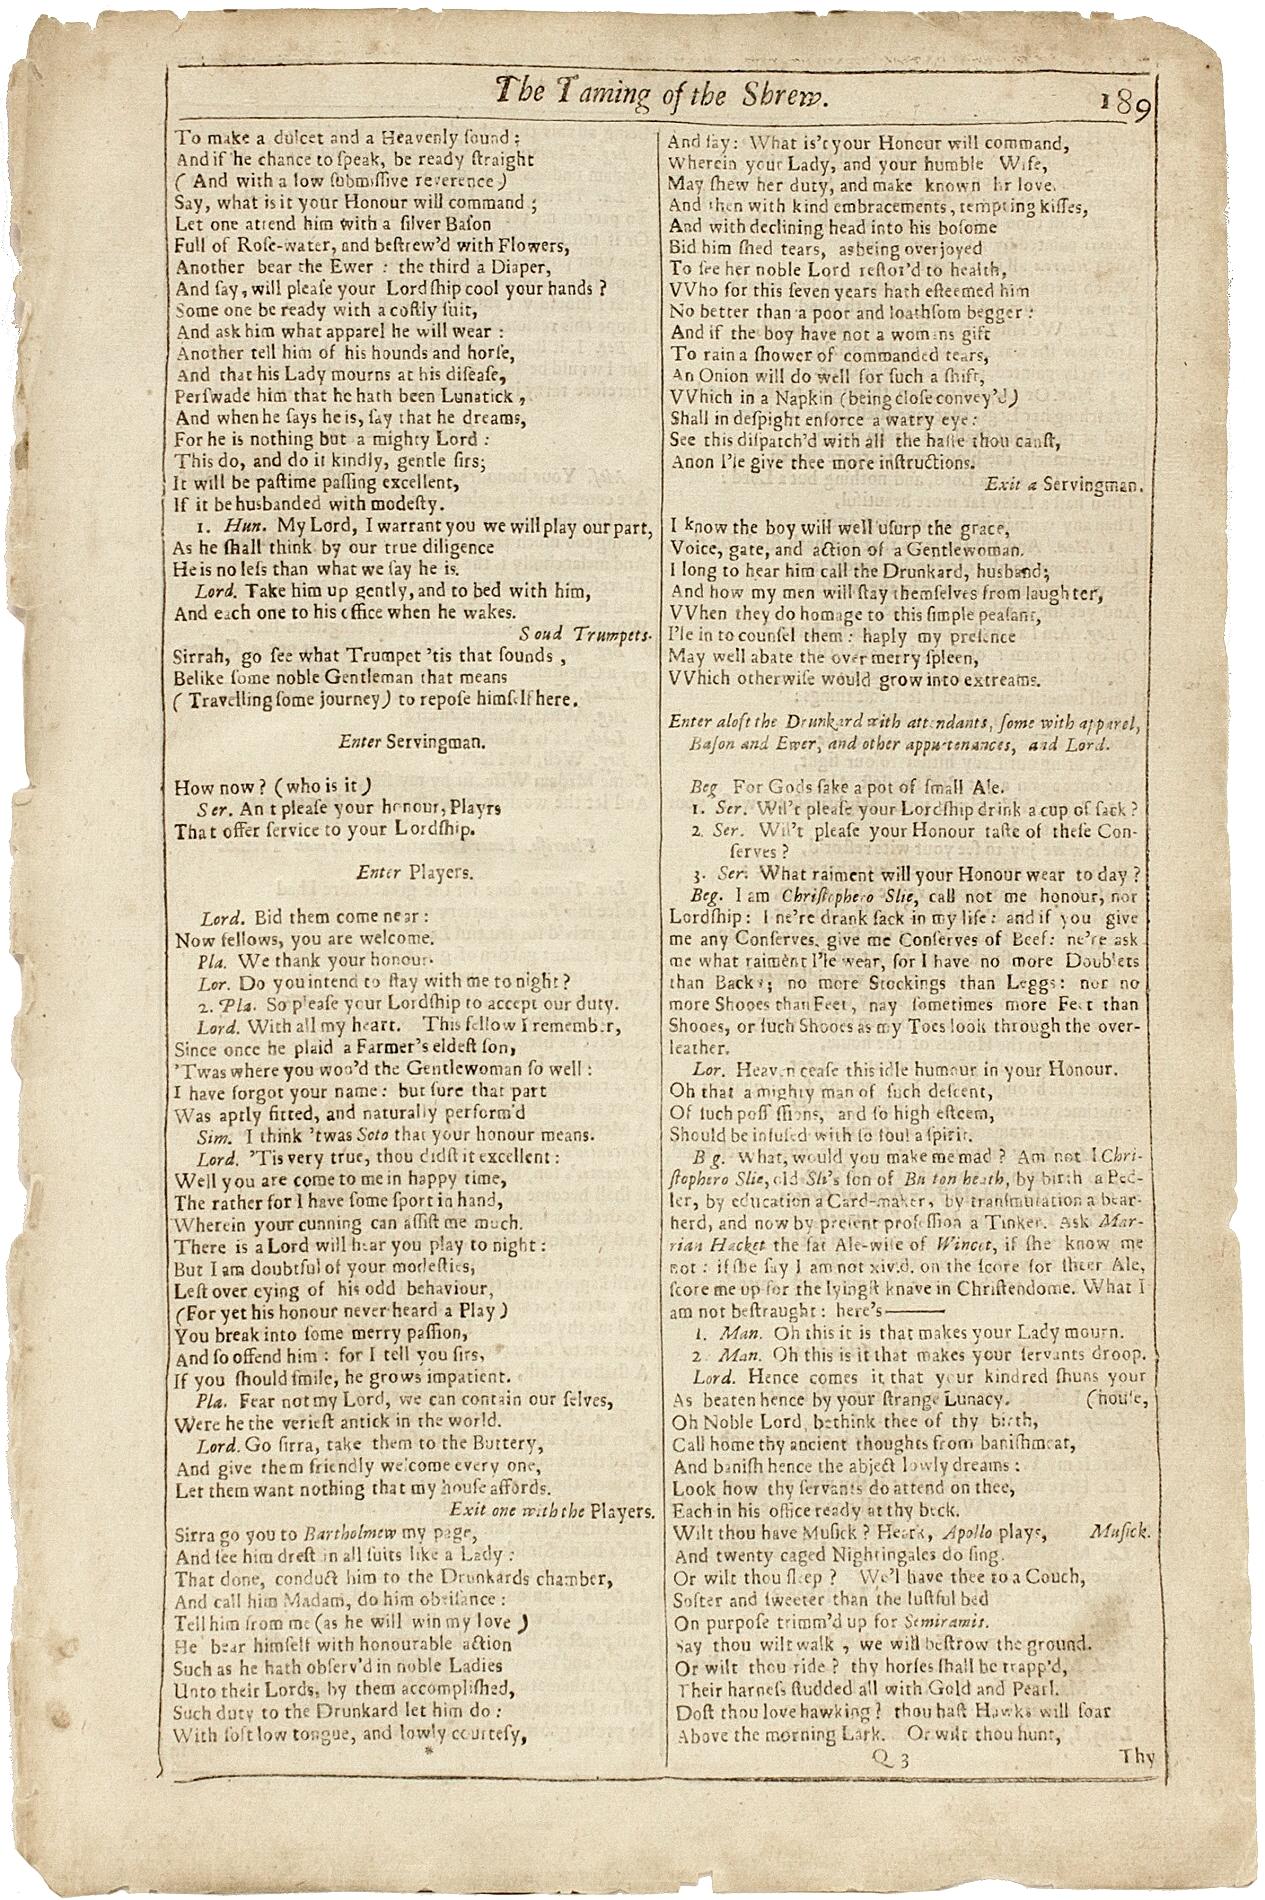 AUTHOR: SHAKESPEARE, William. 

TITLE: The Works of William Shakespeare. (The Taming of the Shrew) - page 189/186.

PUBLISHER: London: Printed for H. Herringman, E. Brewster and R. Bentley, 1685.

DESCRIPTION: THE FOURTH FOLIO. 189/186p.,